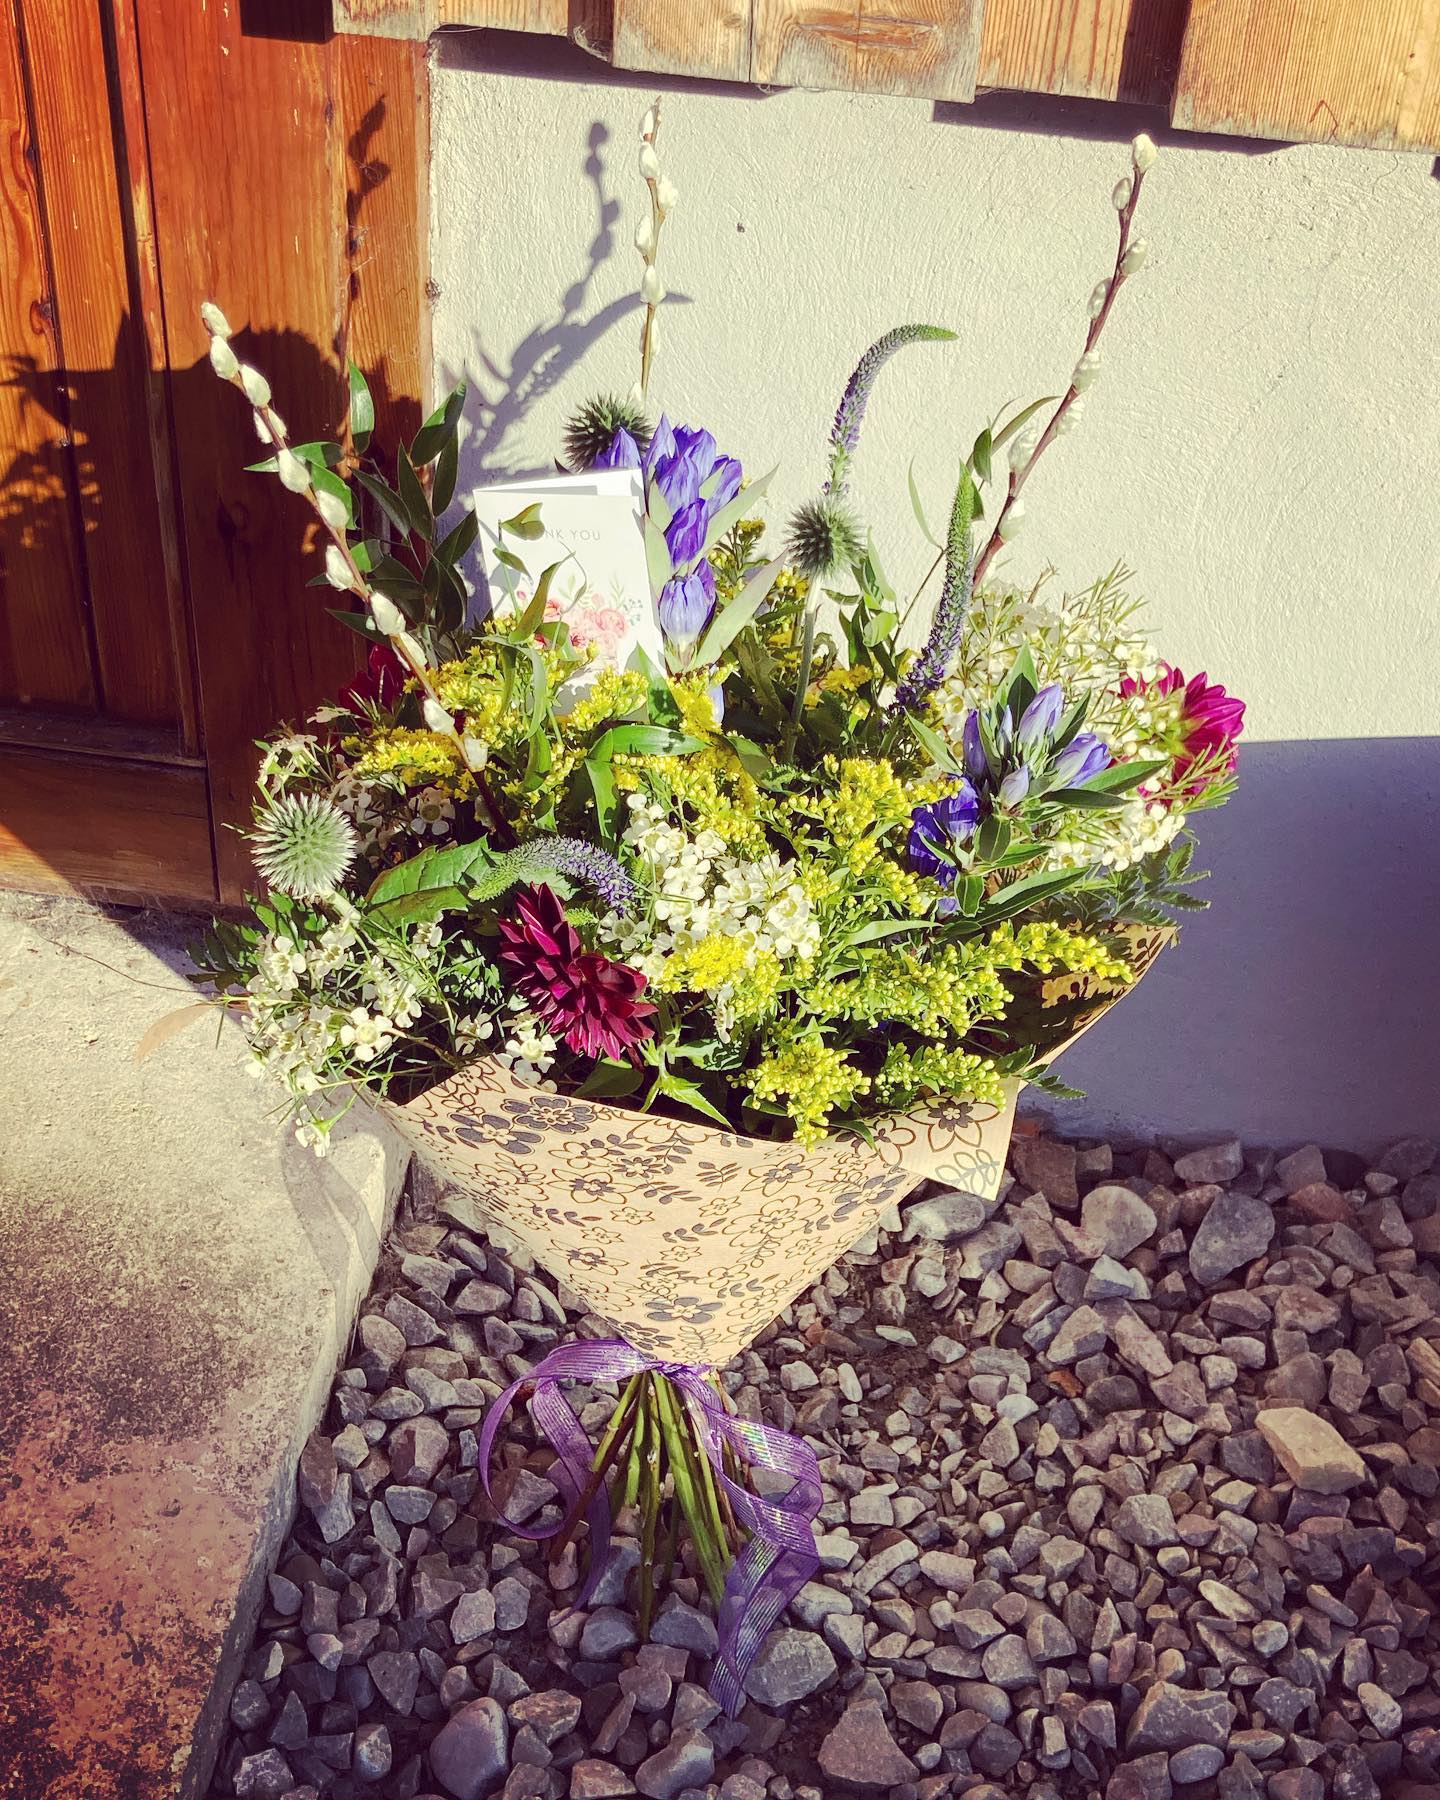 A beautiful bouquet of natural gift flowers. Florist is Rachel's Country Flowers in Edderton, near Dornoch and Tain in the Scottish Highlands